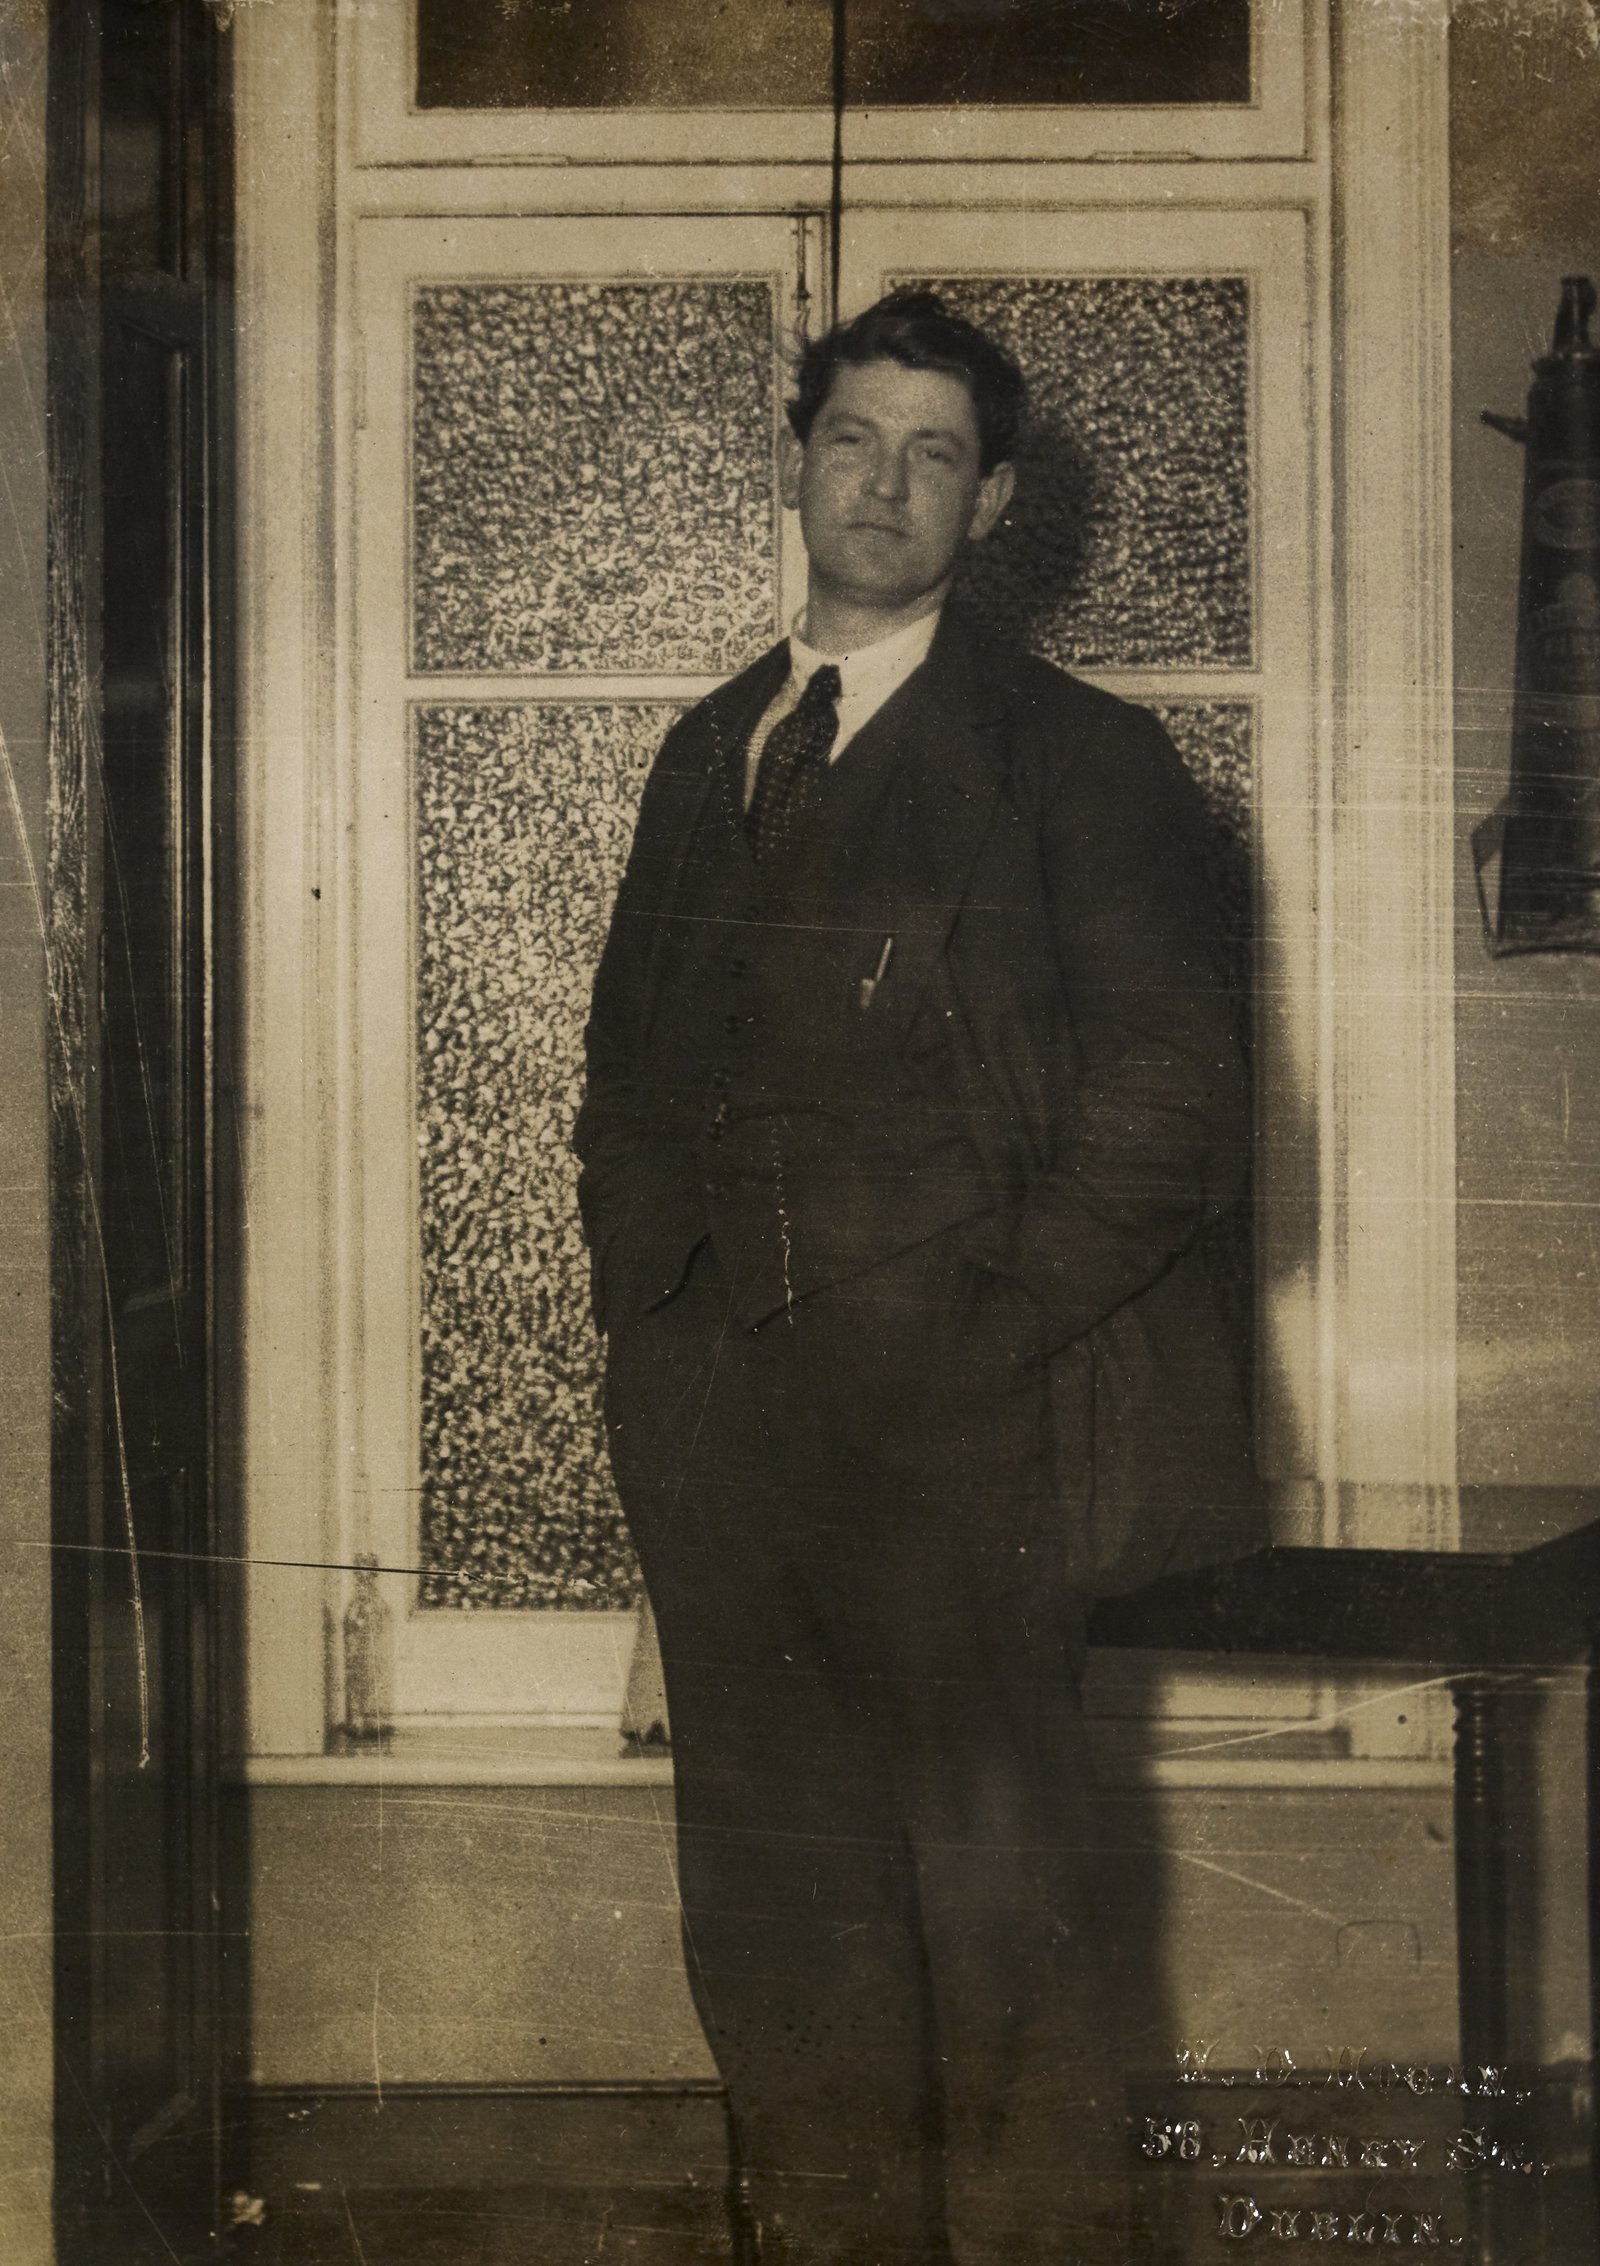 Image - An exhausted Michael Collins photographed at the Gresham Hotel, the night of the vote to ratify the Treaty. Unusually for Collins, he is happy to be photographed at an unguarded moment. Credit: National Library of Ireland